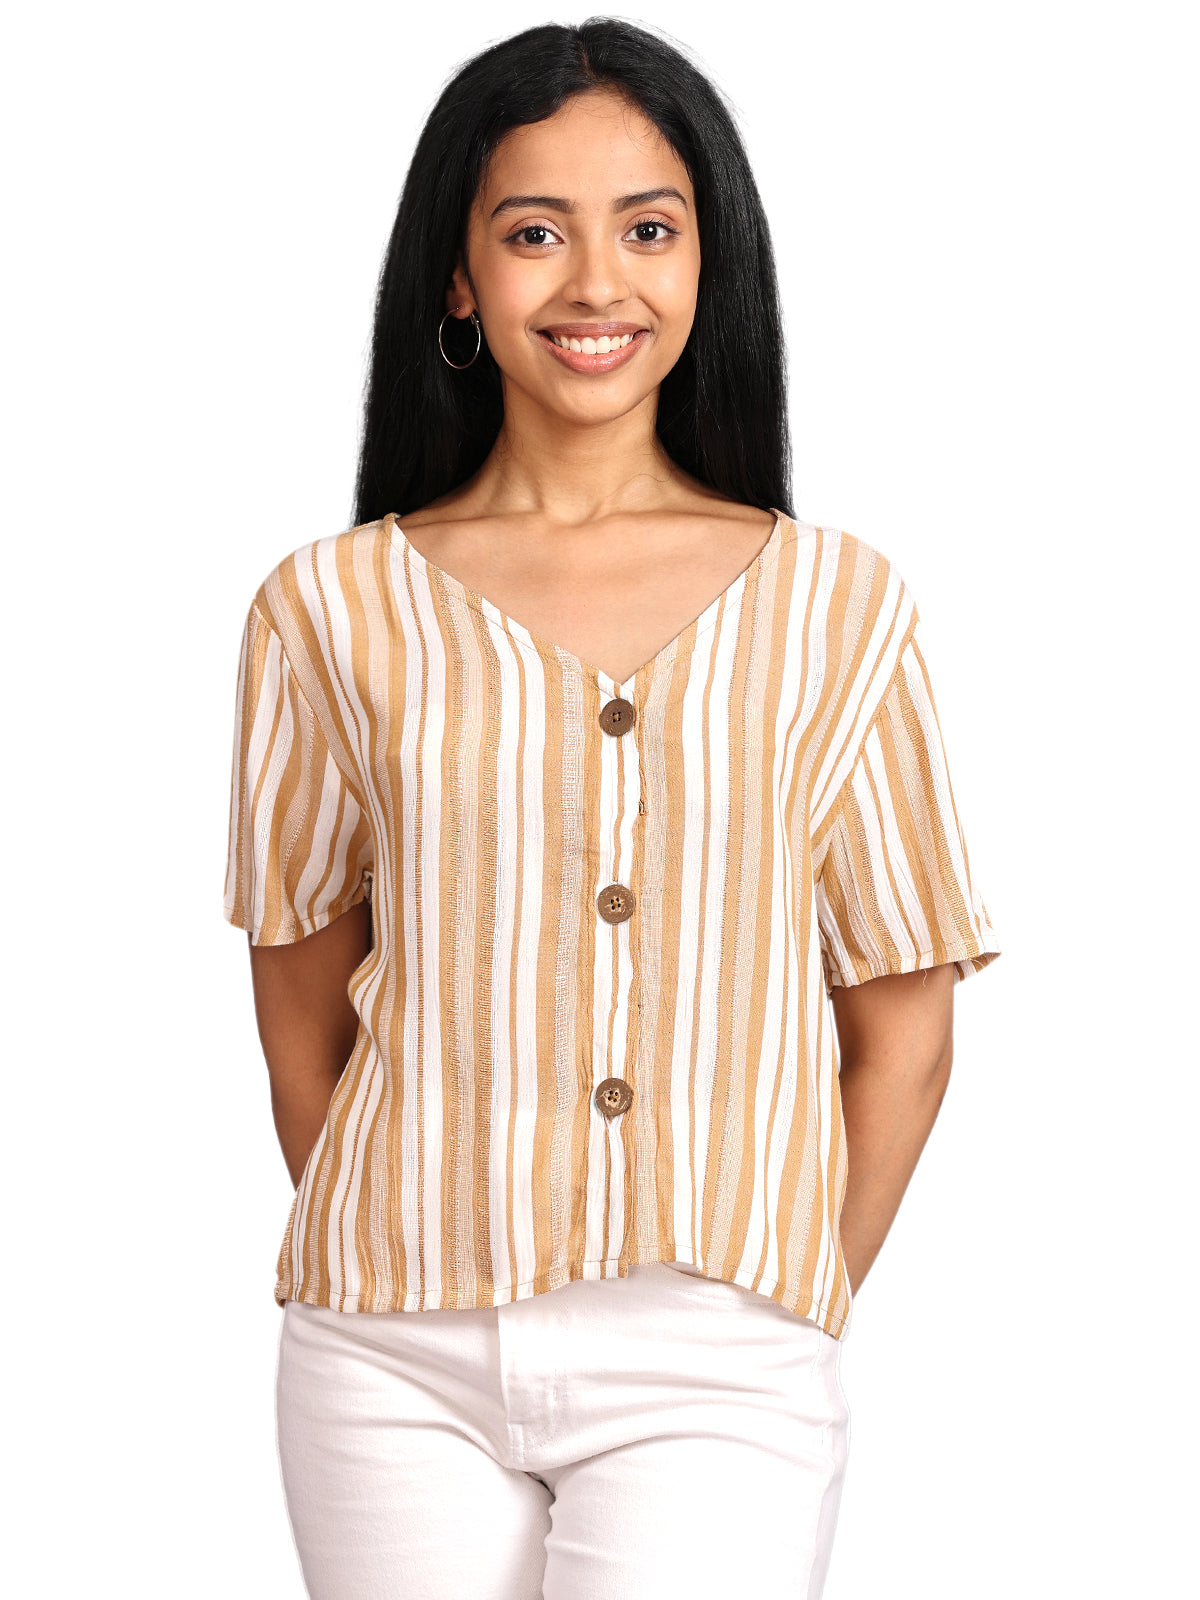 Half Sleeve Crop Top with Buttons Striped